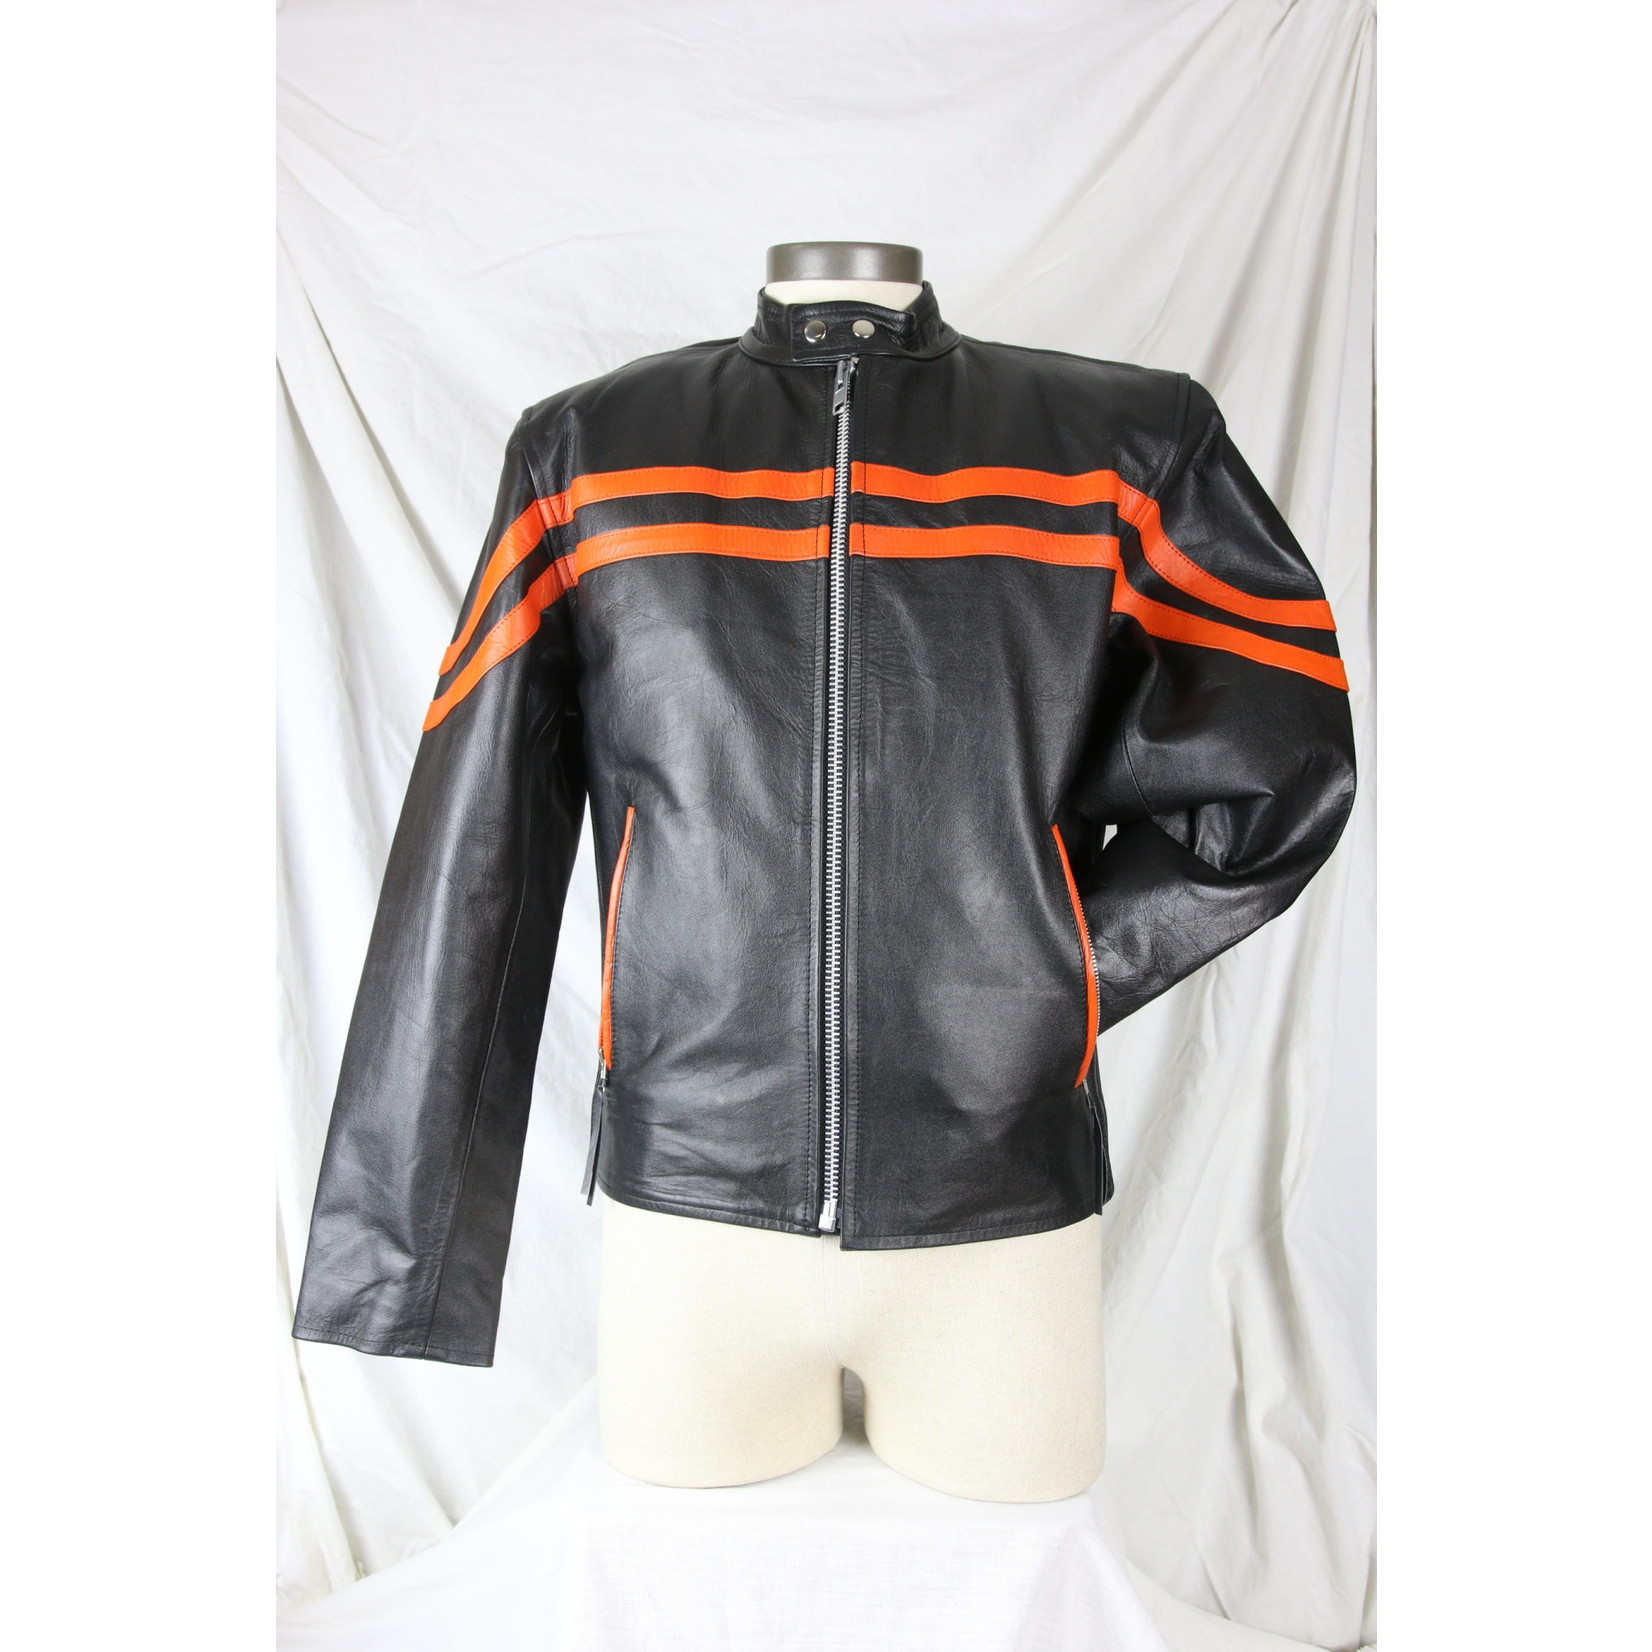 Safari Collections Mens Straight Collar Jacket Black with Orange Details with Zip-Out Liner